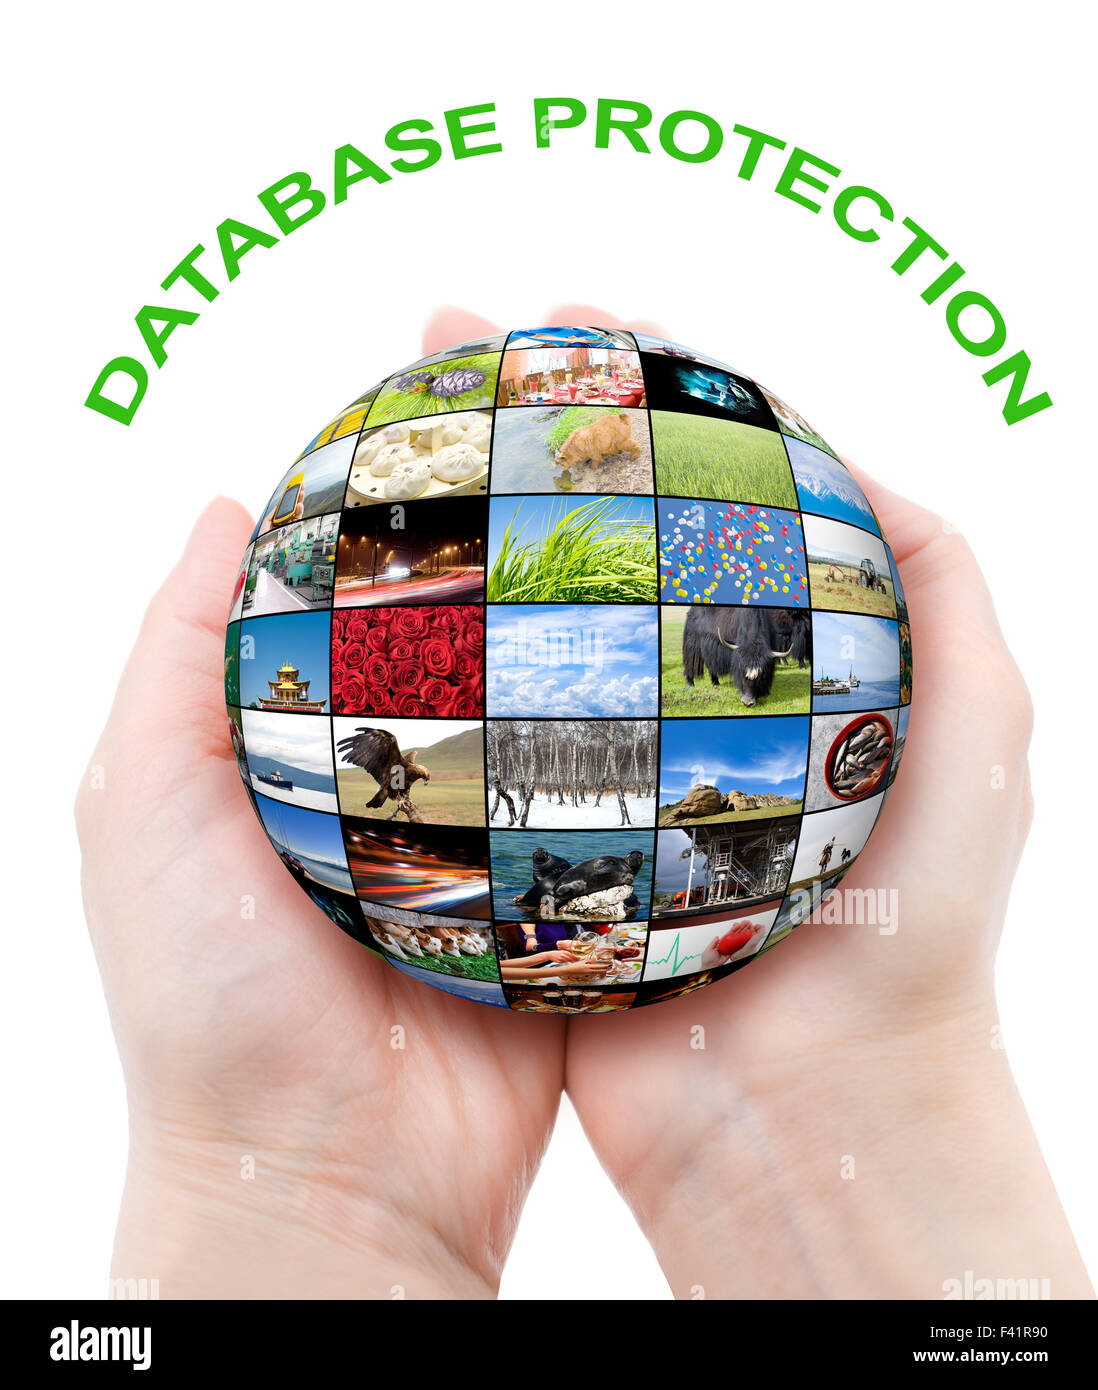 concept of database protection Stock Photo